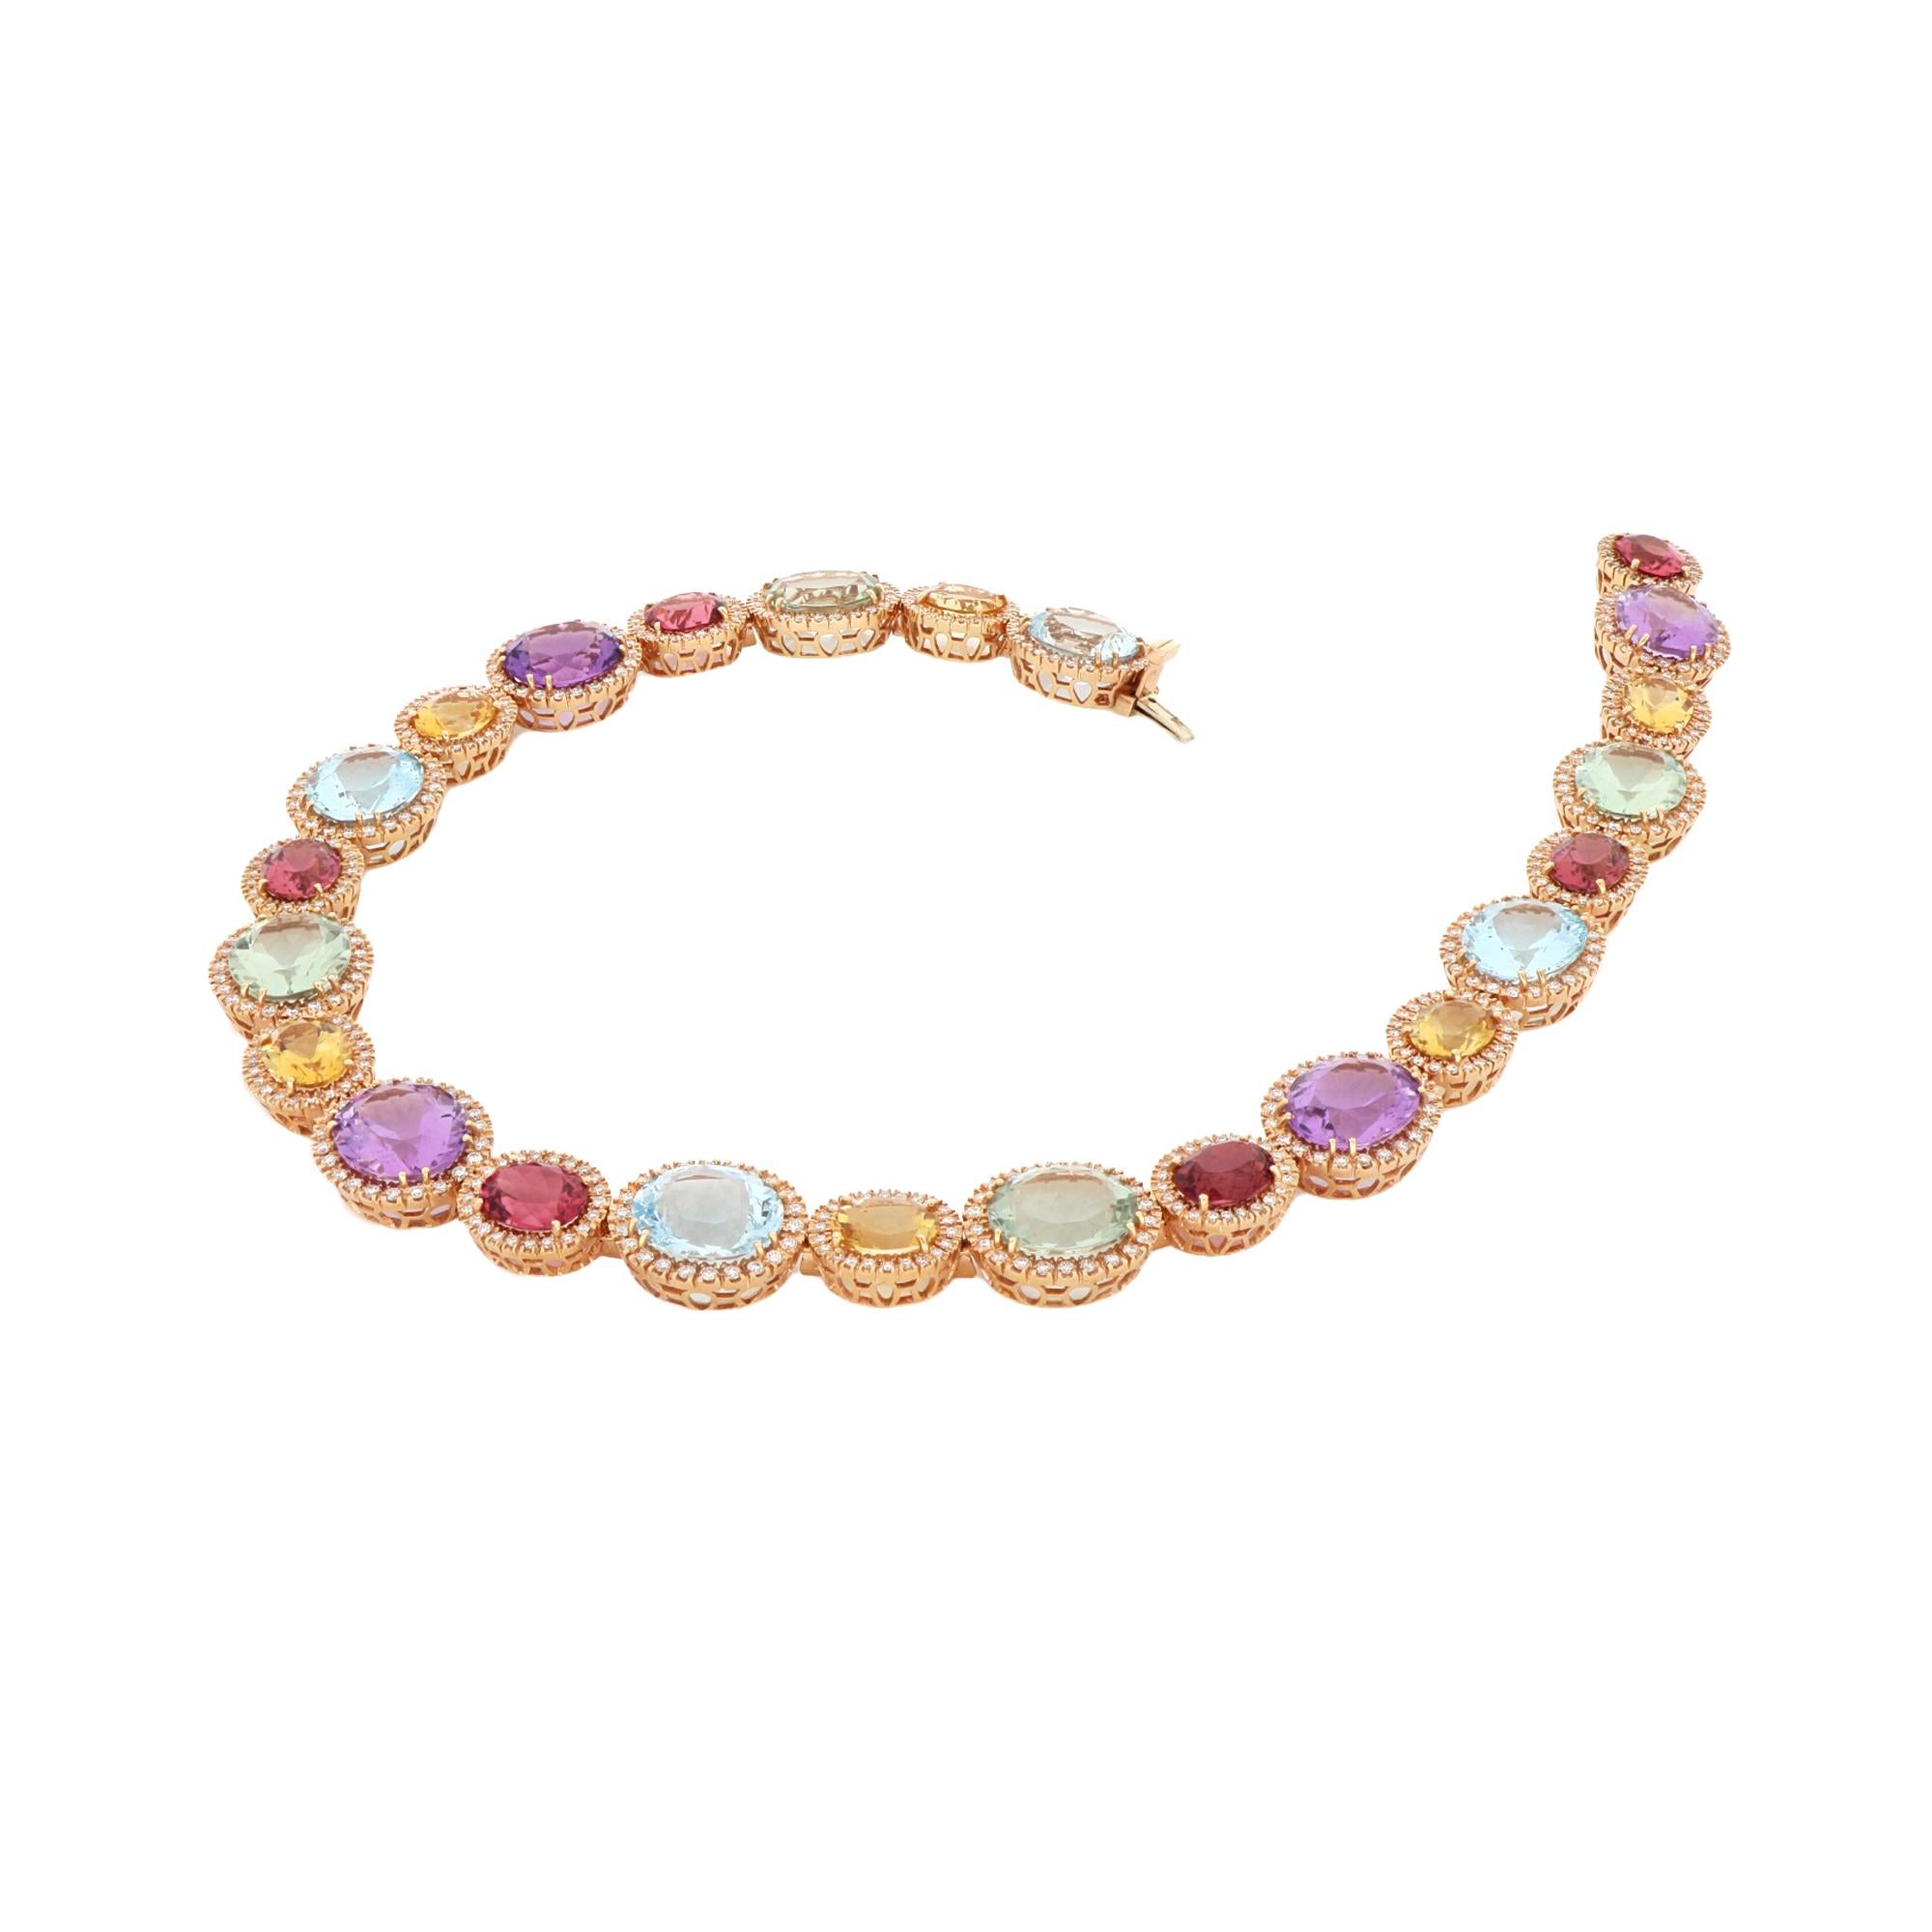 Add sparkle and a touch of color to your wardrobe with our dazzling multi-gemstone necklace. Crafted in 18kt red gold, this eye-catching necklace features an array of multi-colored gemstones that lend a vibrant rainbow effect.
It features 6 citrine